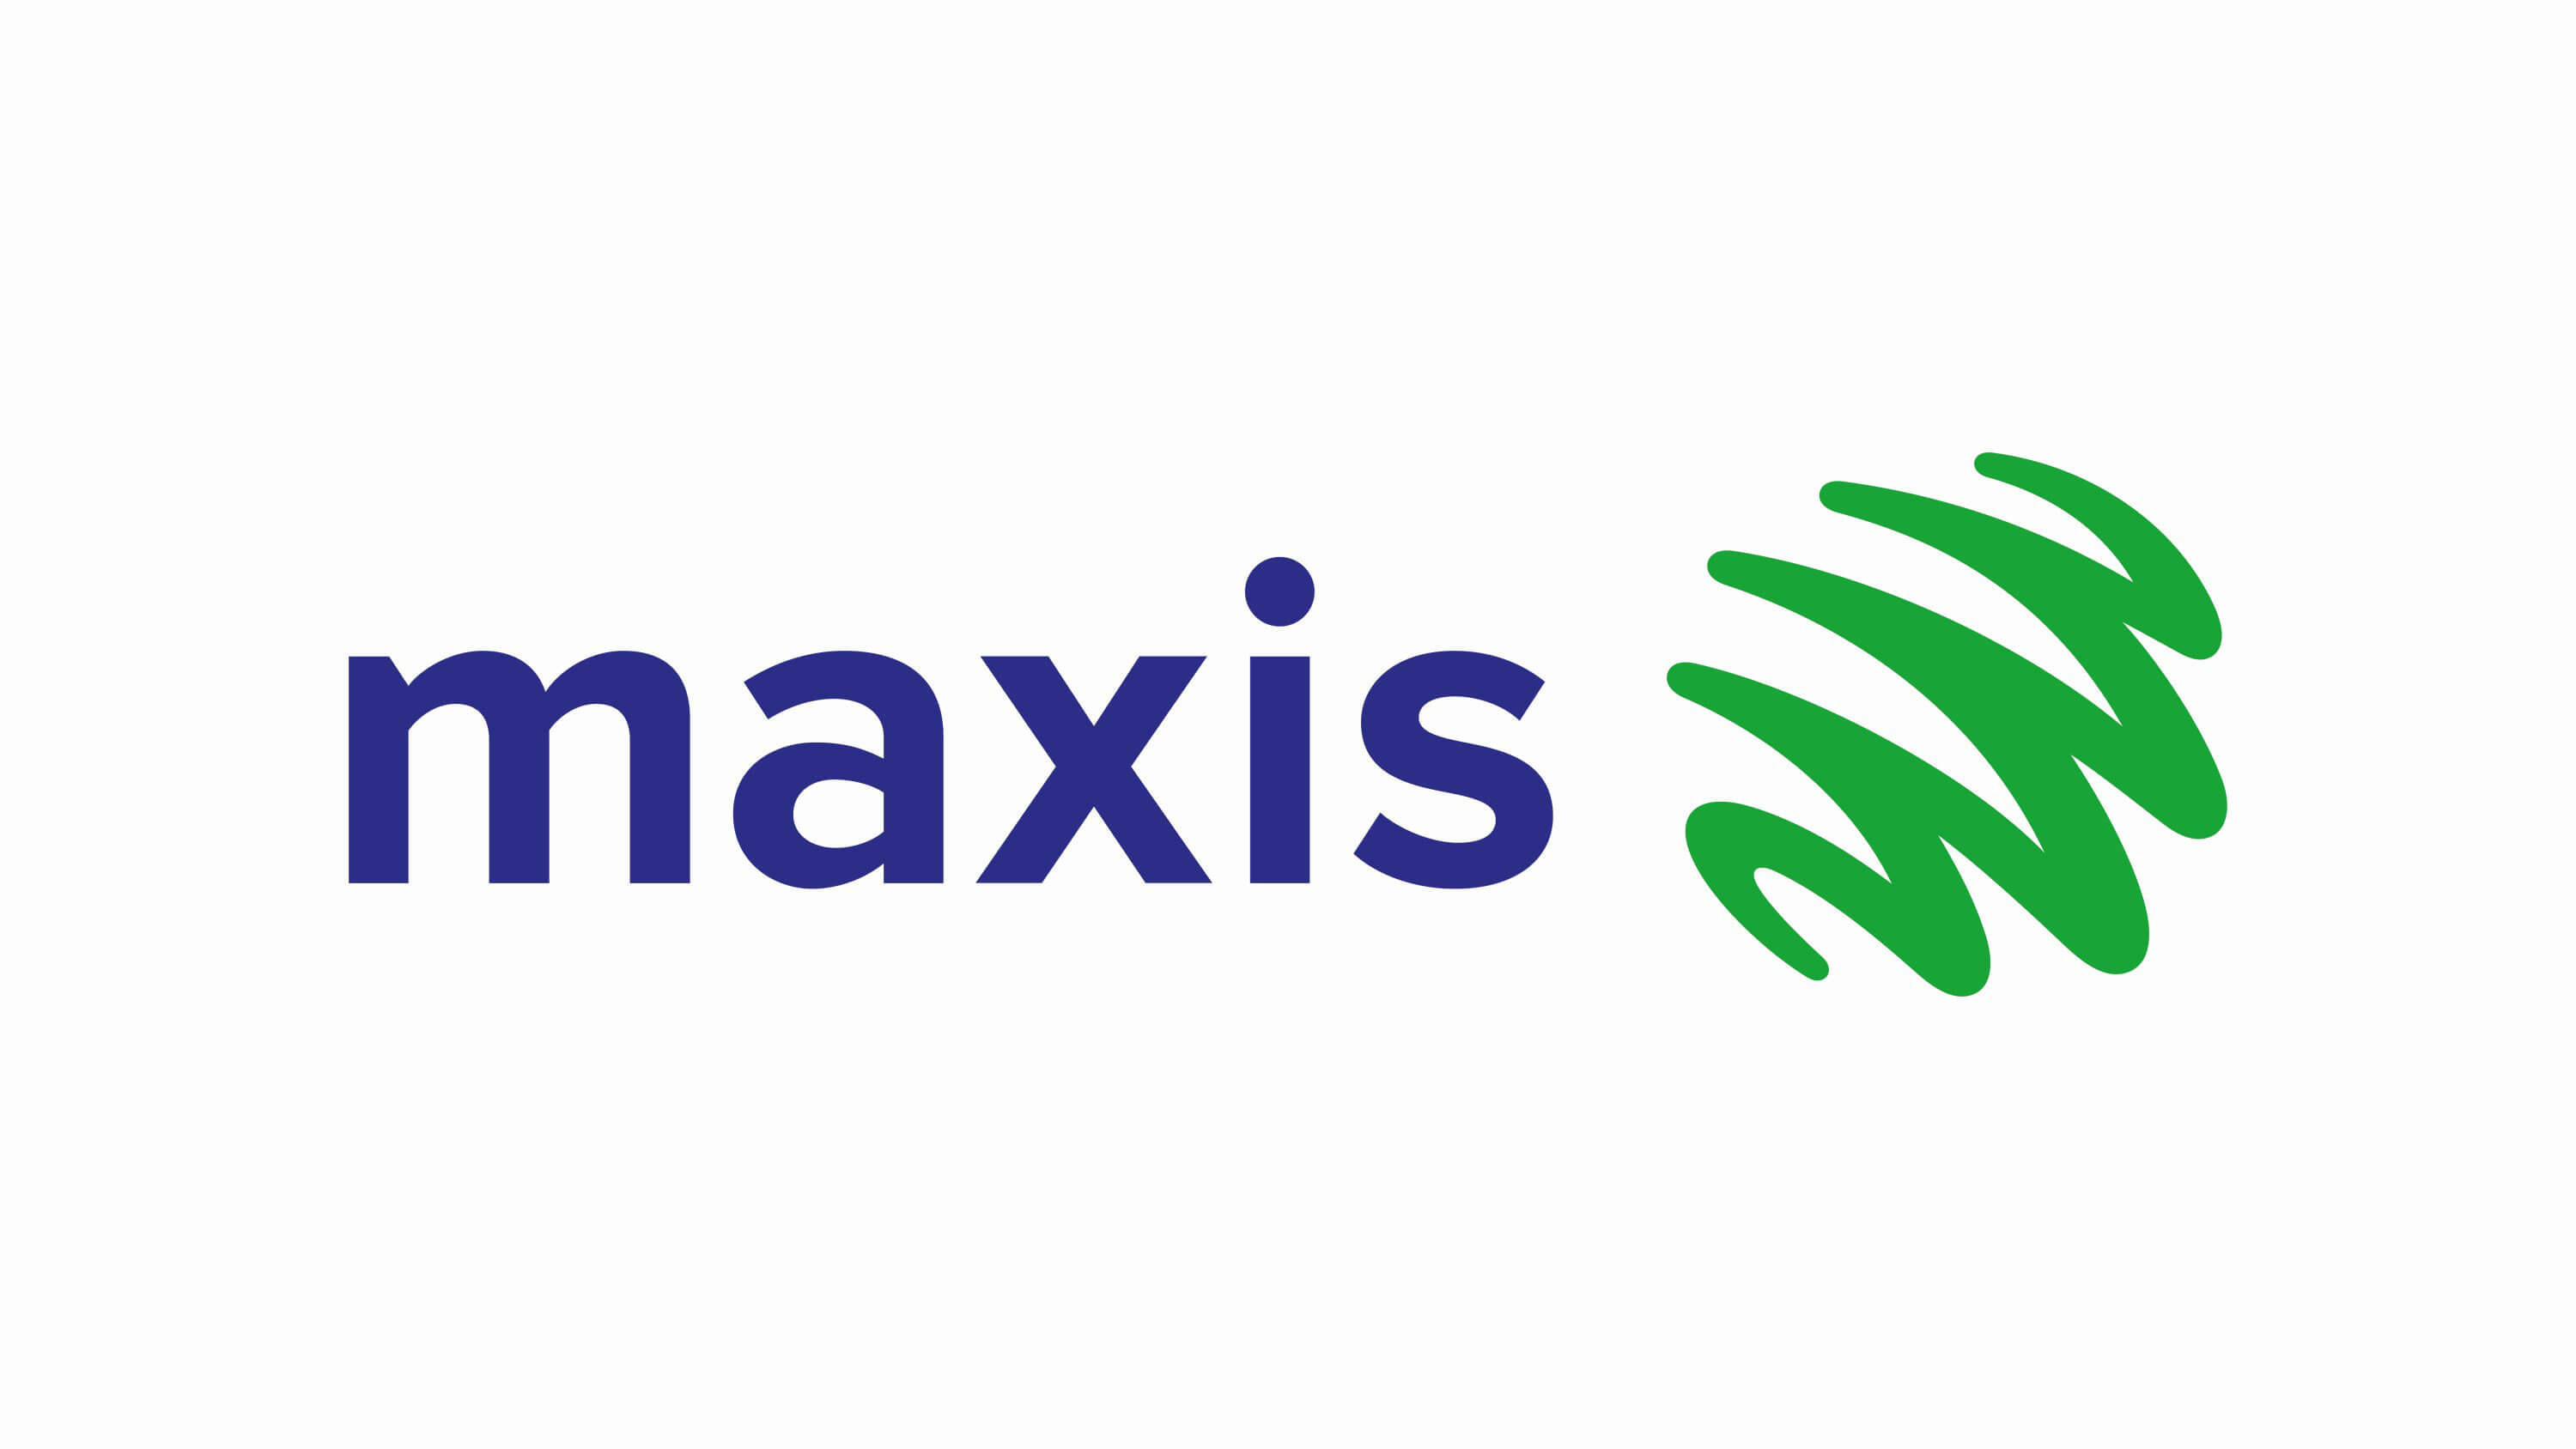 Maxis closes FY2022 with steady growth across all segments